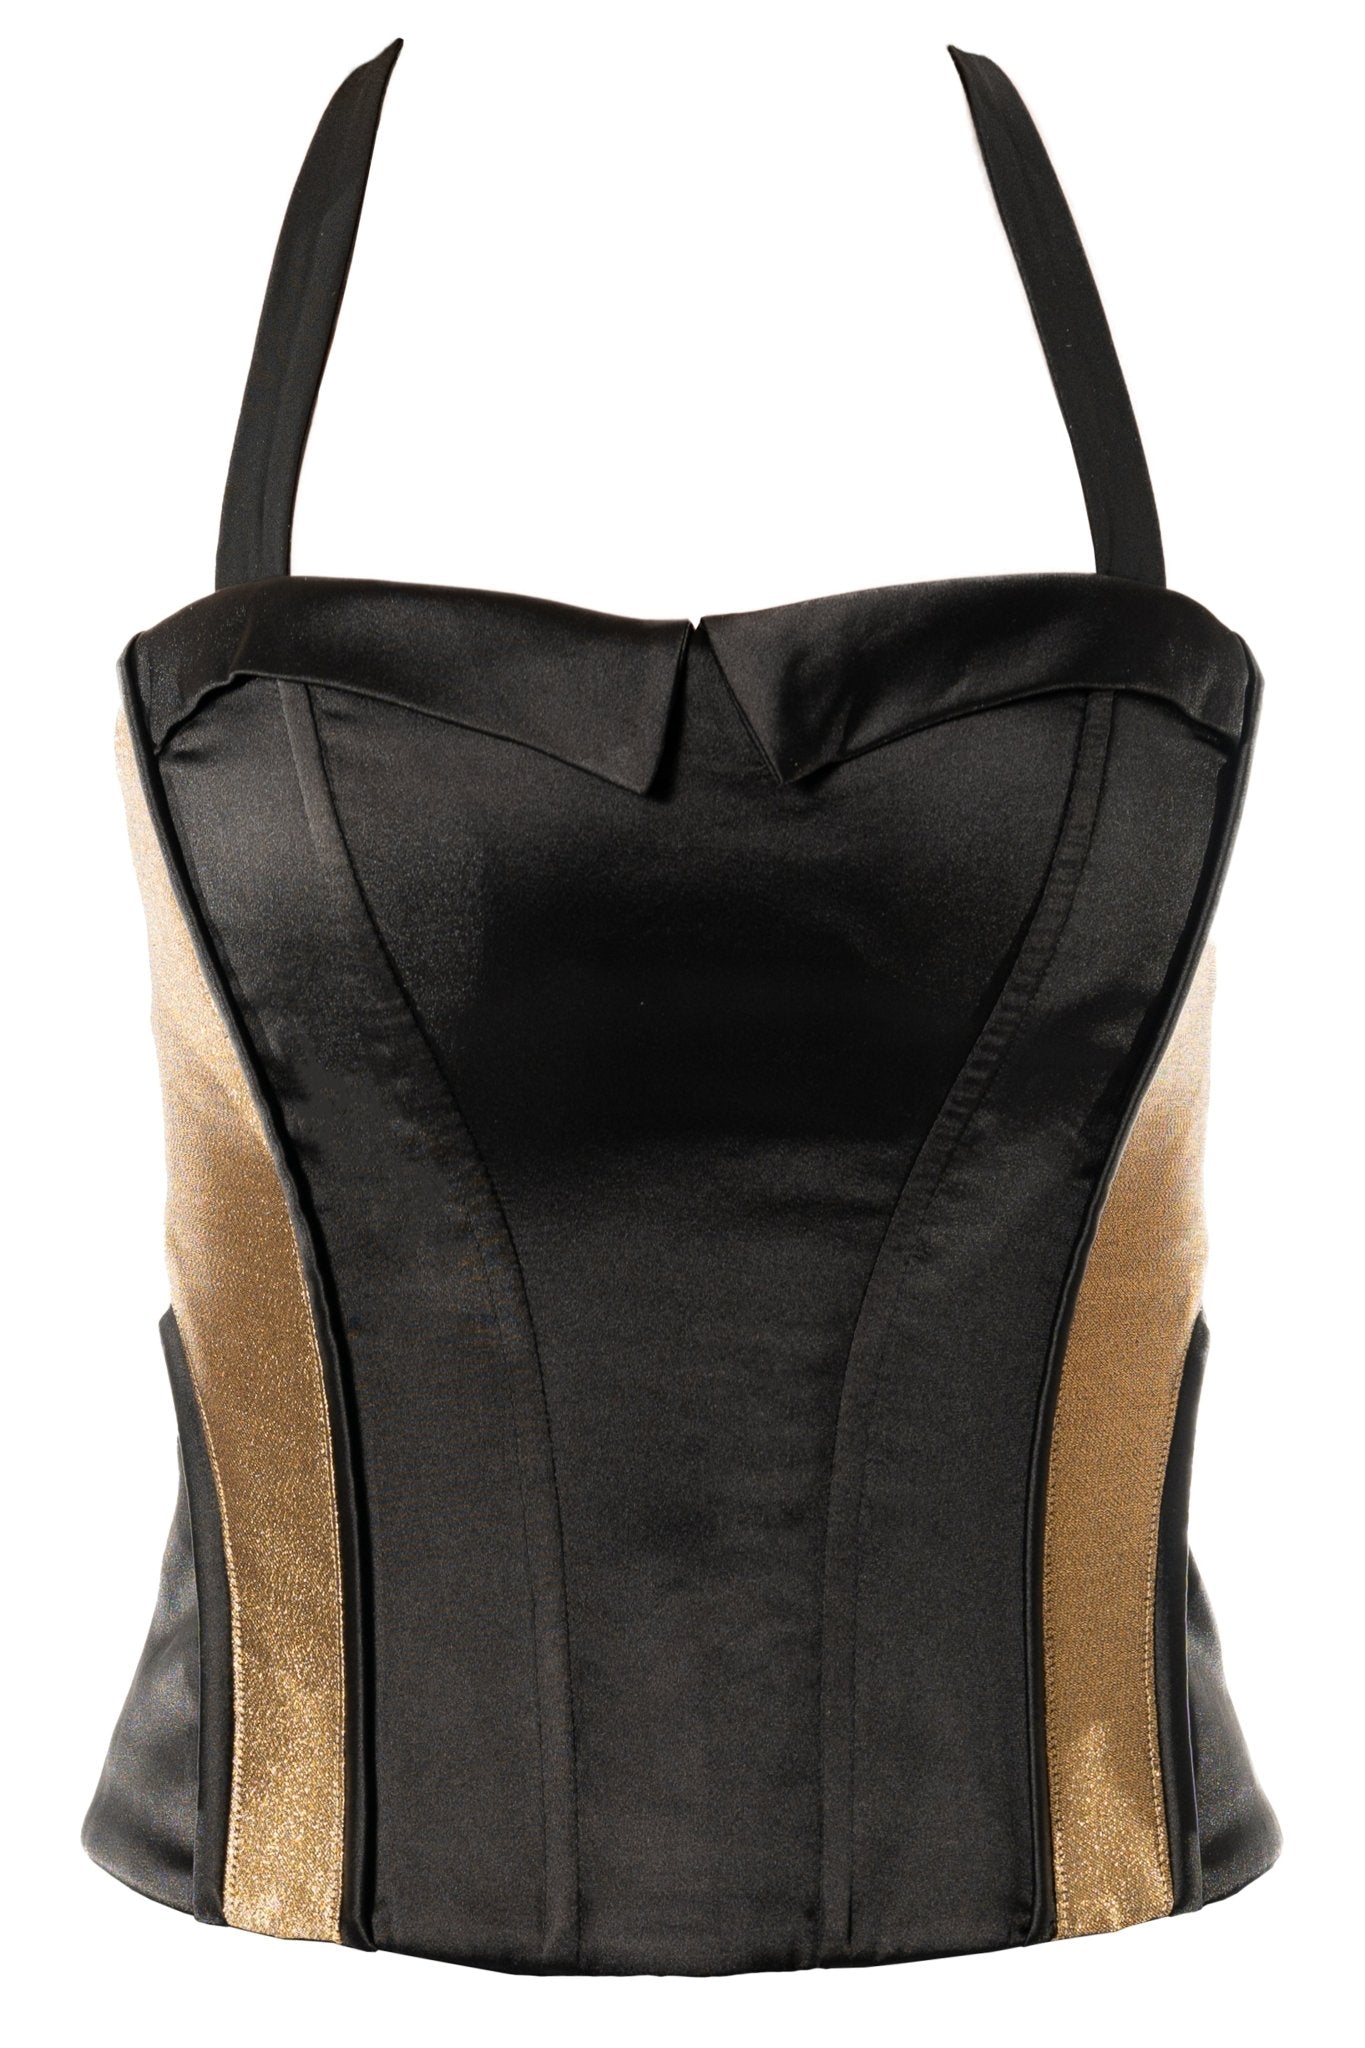 LILA Bustier Uniform Corset Top for casino, gaming, hotel, restaurants, hospitality, and resorts. Black satin with gold brocade sides with adjustable straps corset uniform. - KAPTVA Apparel